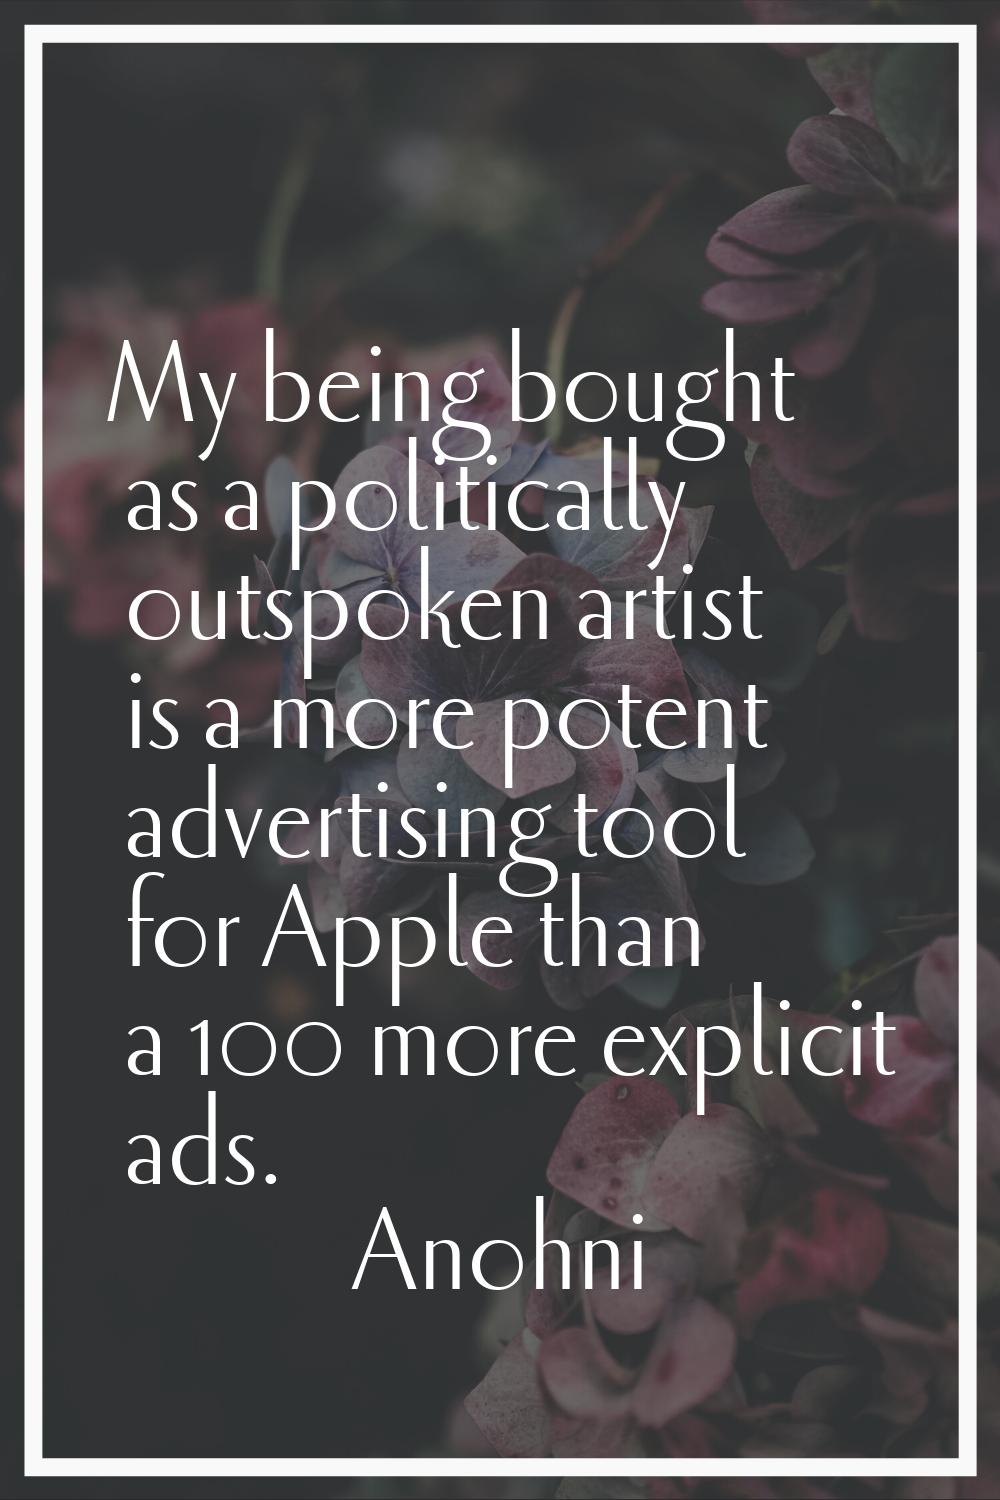 My being bought as a politically outspoken artist is a more potent advertising tool for Apple than 